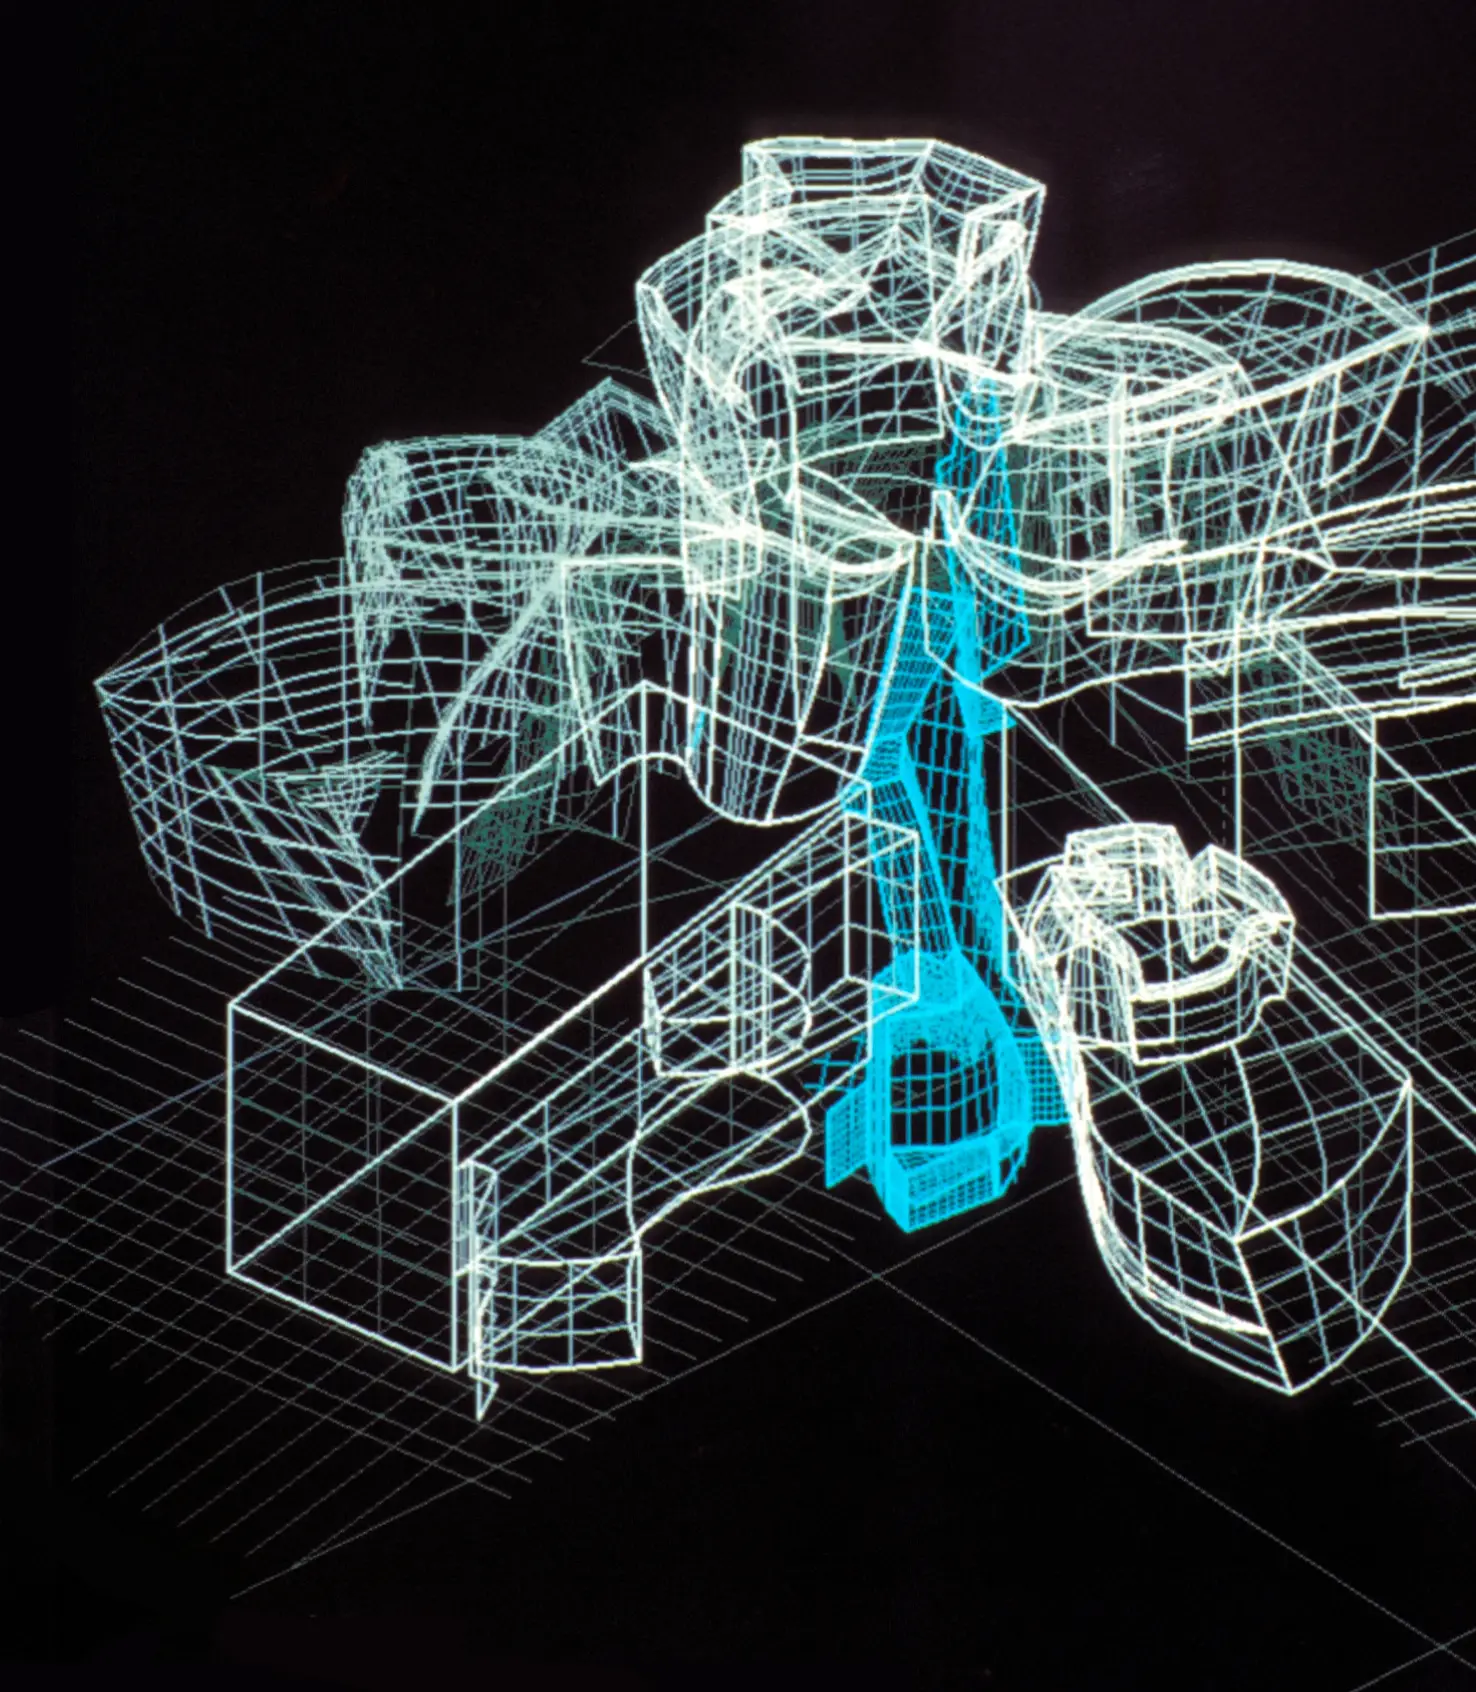 A screen capture of a CATIA digital model of Guggenheim Bilbao. The digital model is rendered in a white and neon blue-on-black wireframe style illustrating the contours of the building exterior.